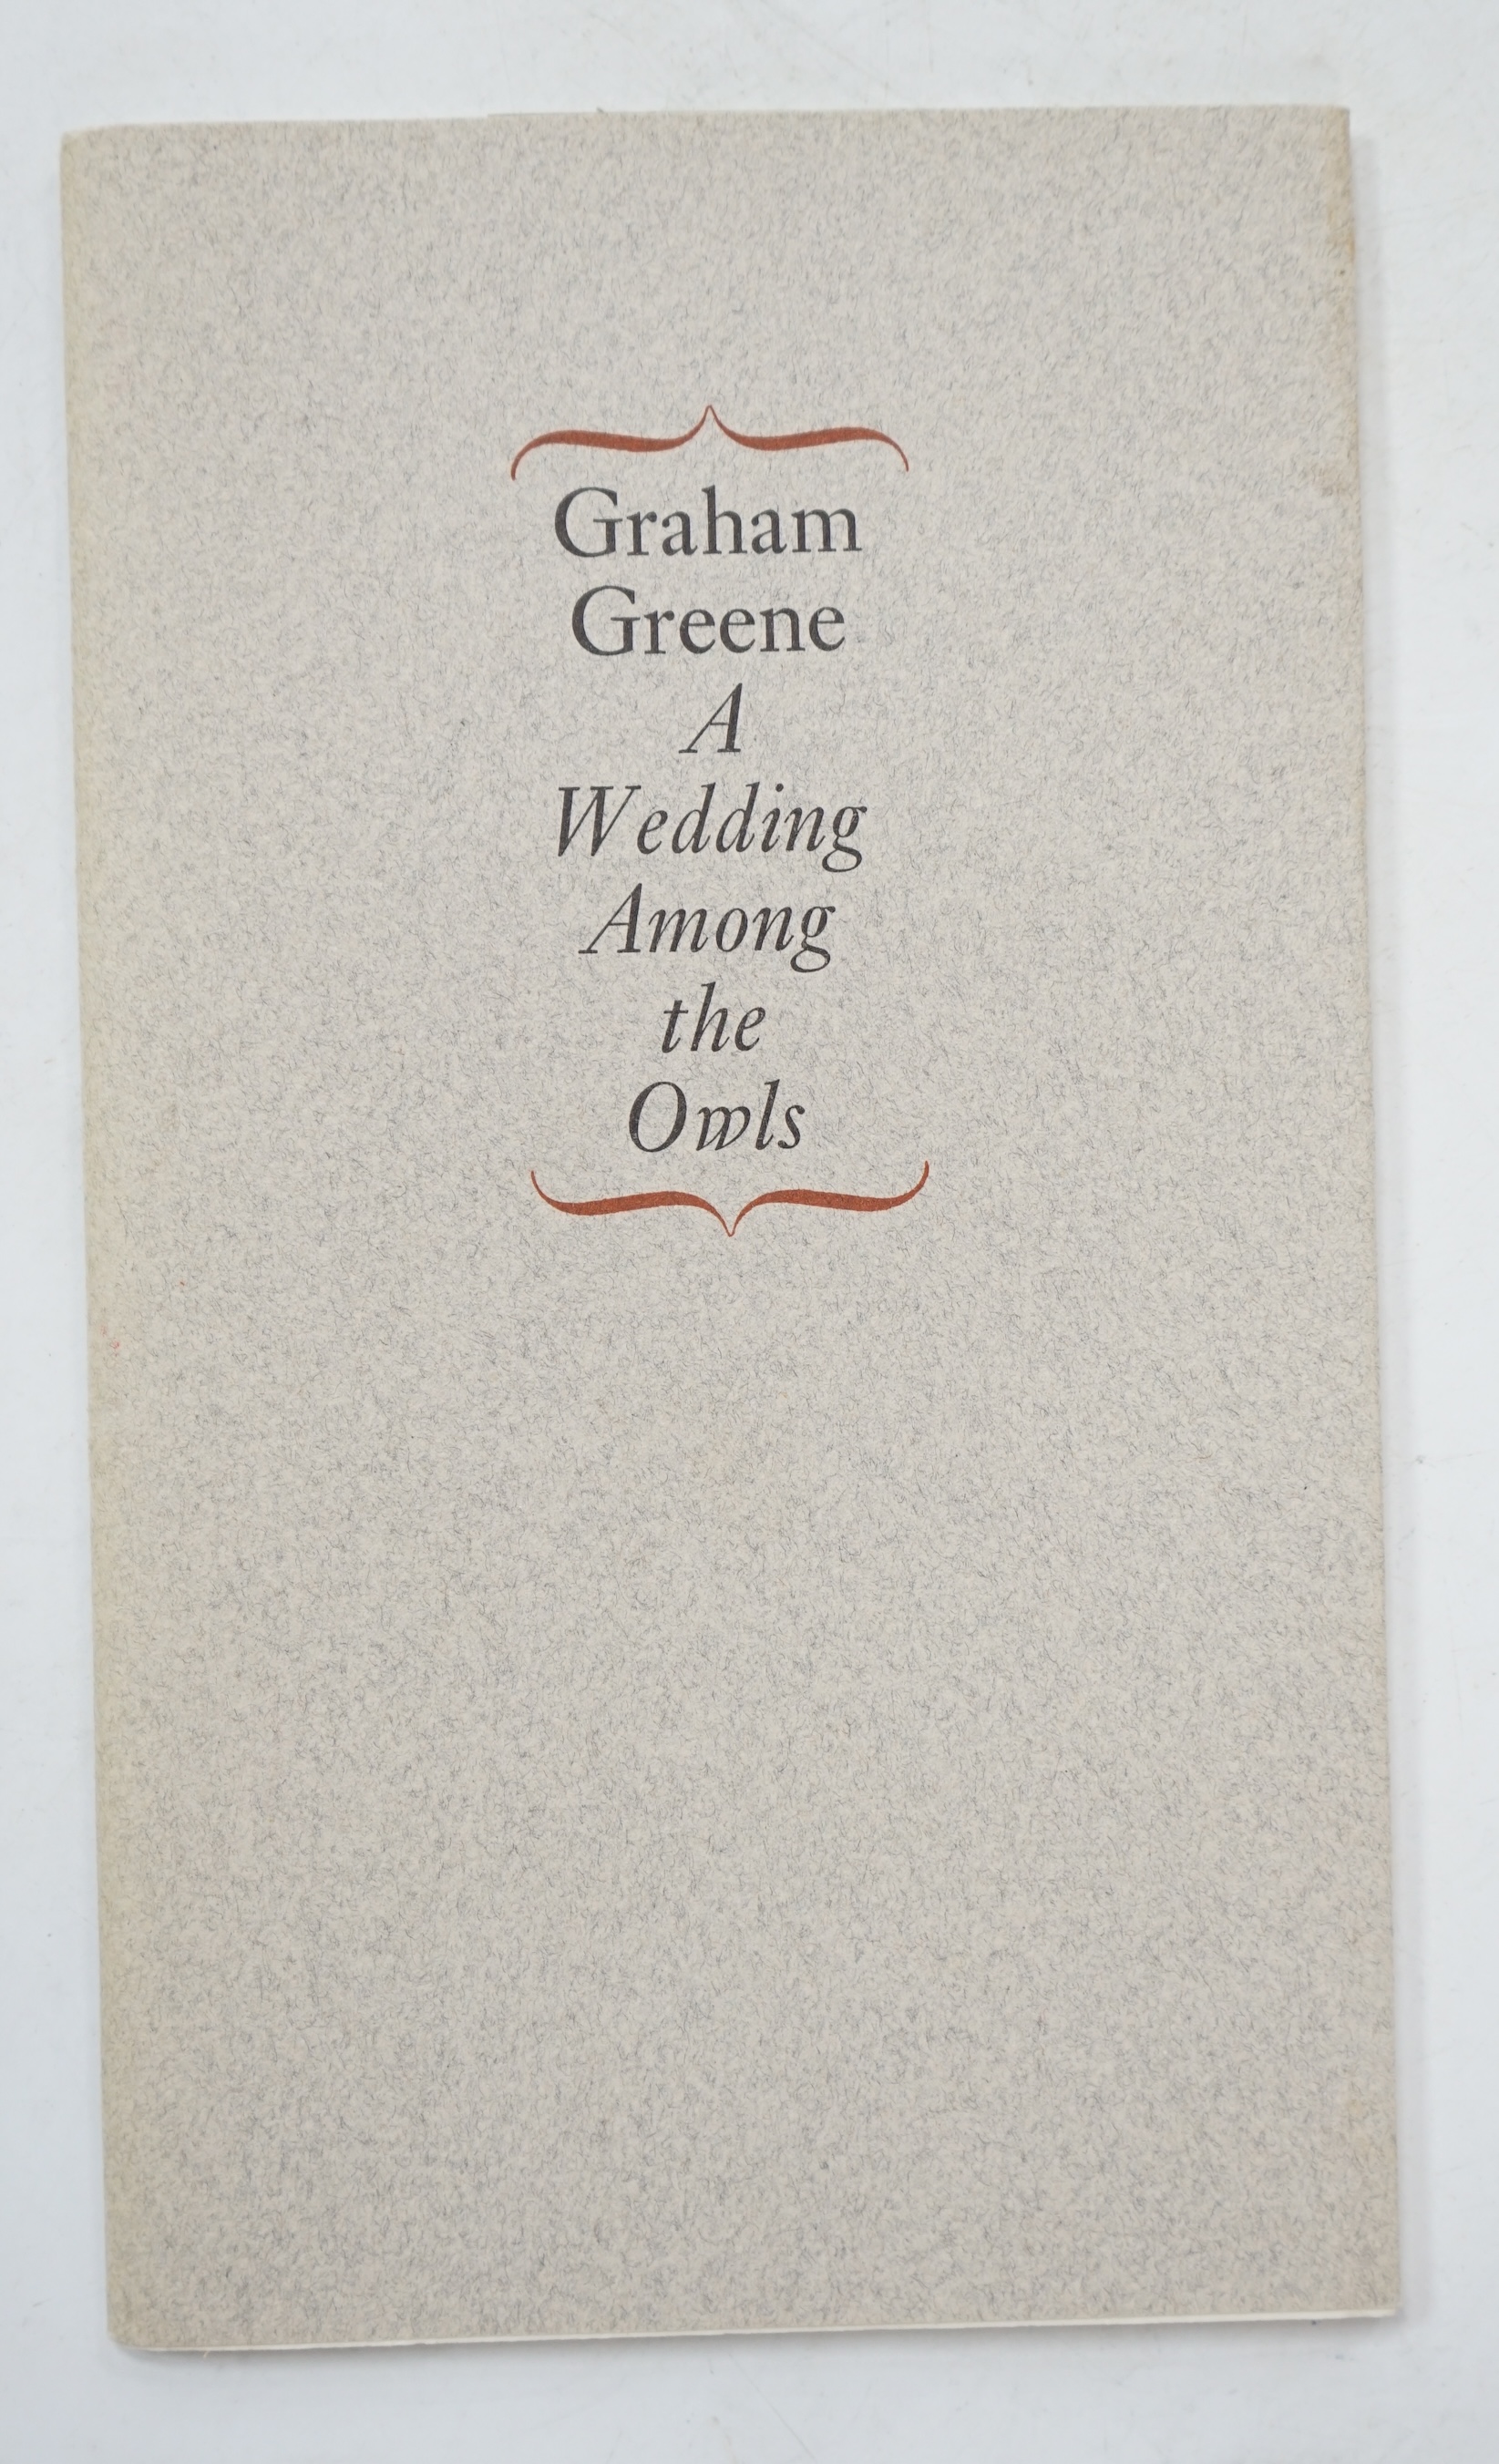 Greene, Graham - A Wedding among the Owls. An extract from The Human Factor. Limited Edition (of 250 copies). original printed wrappers. Bodley Head, (1977)